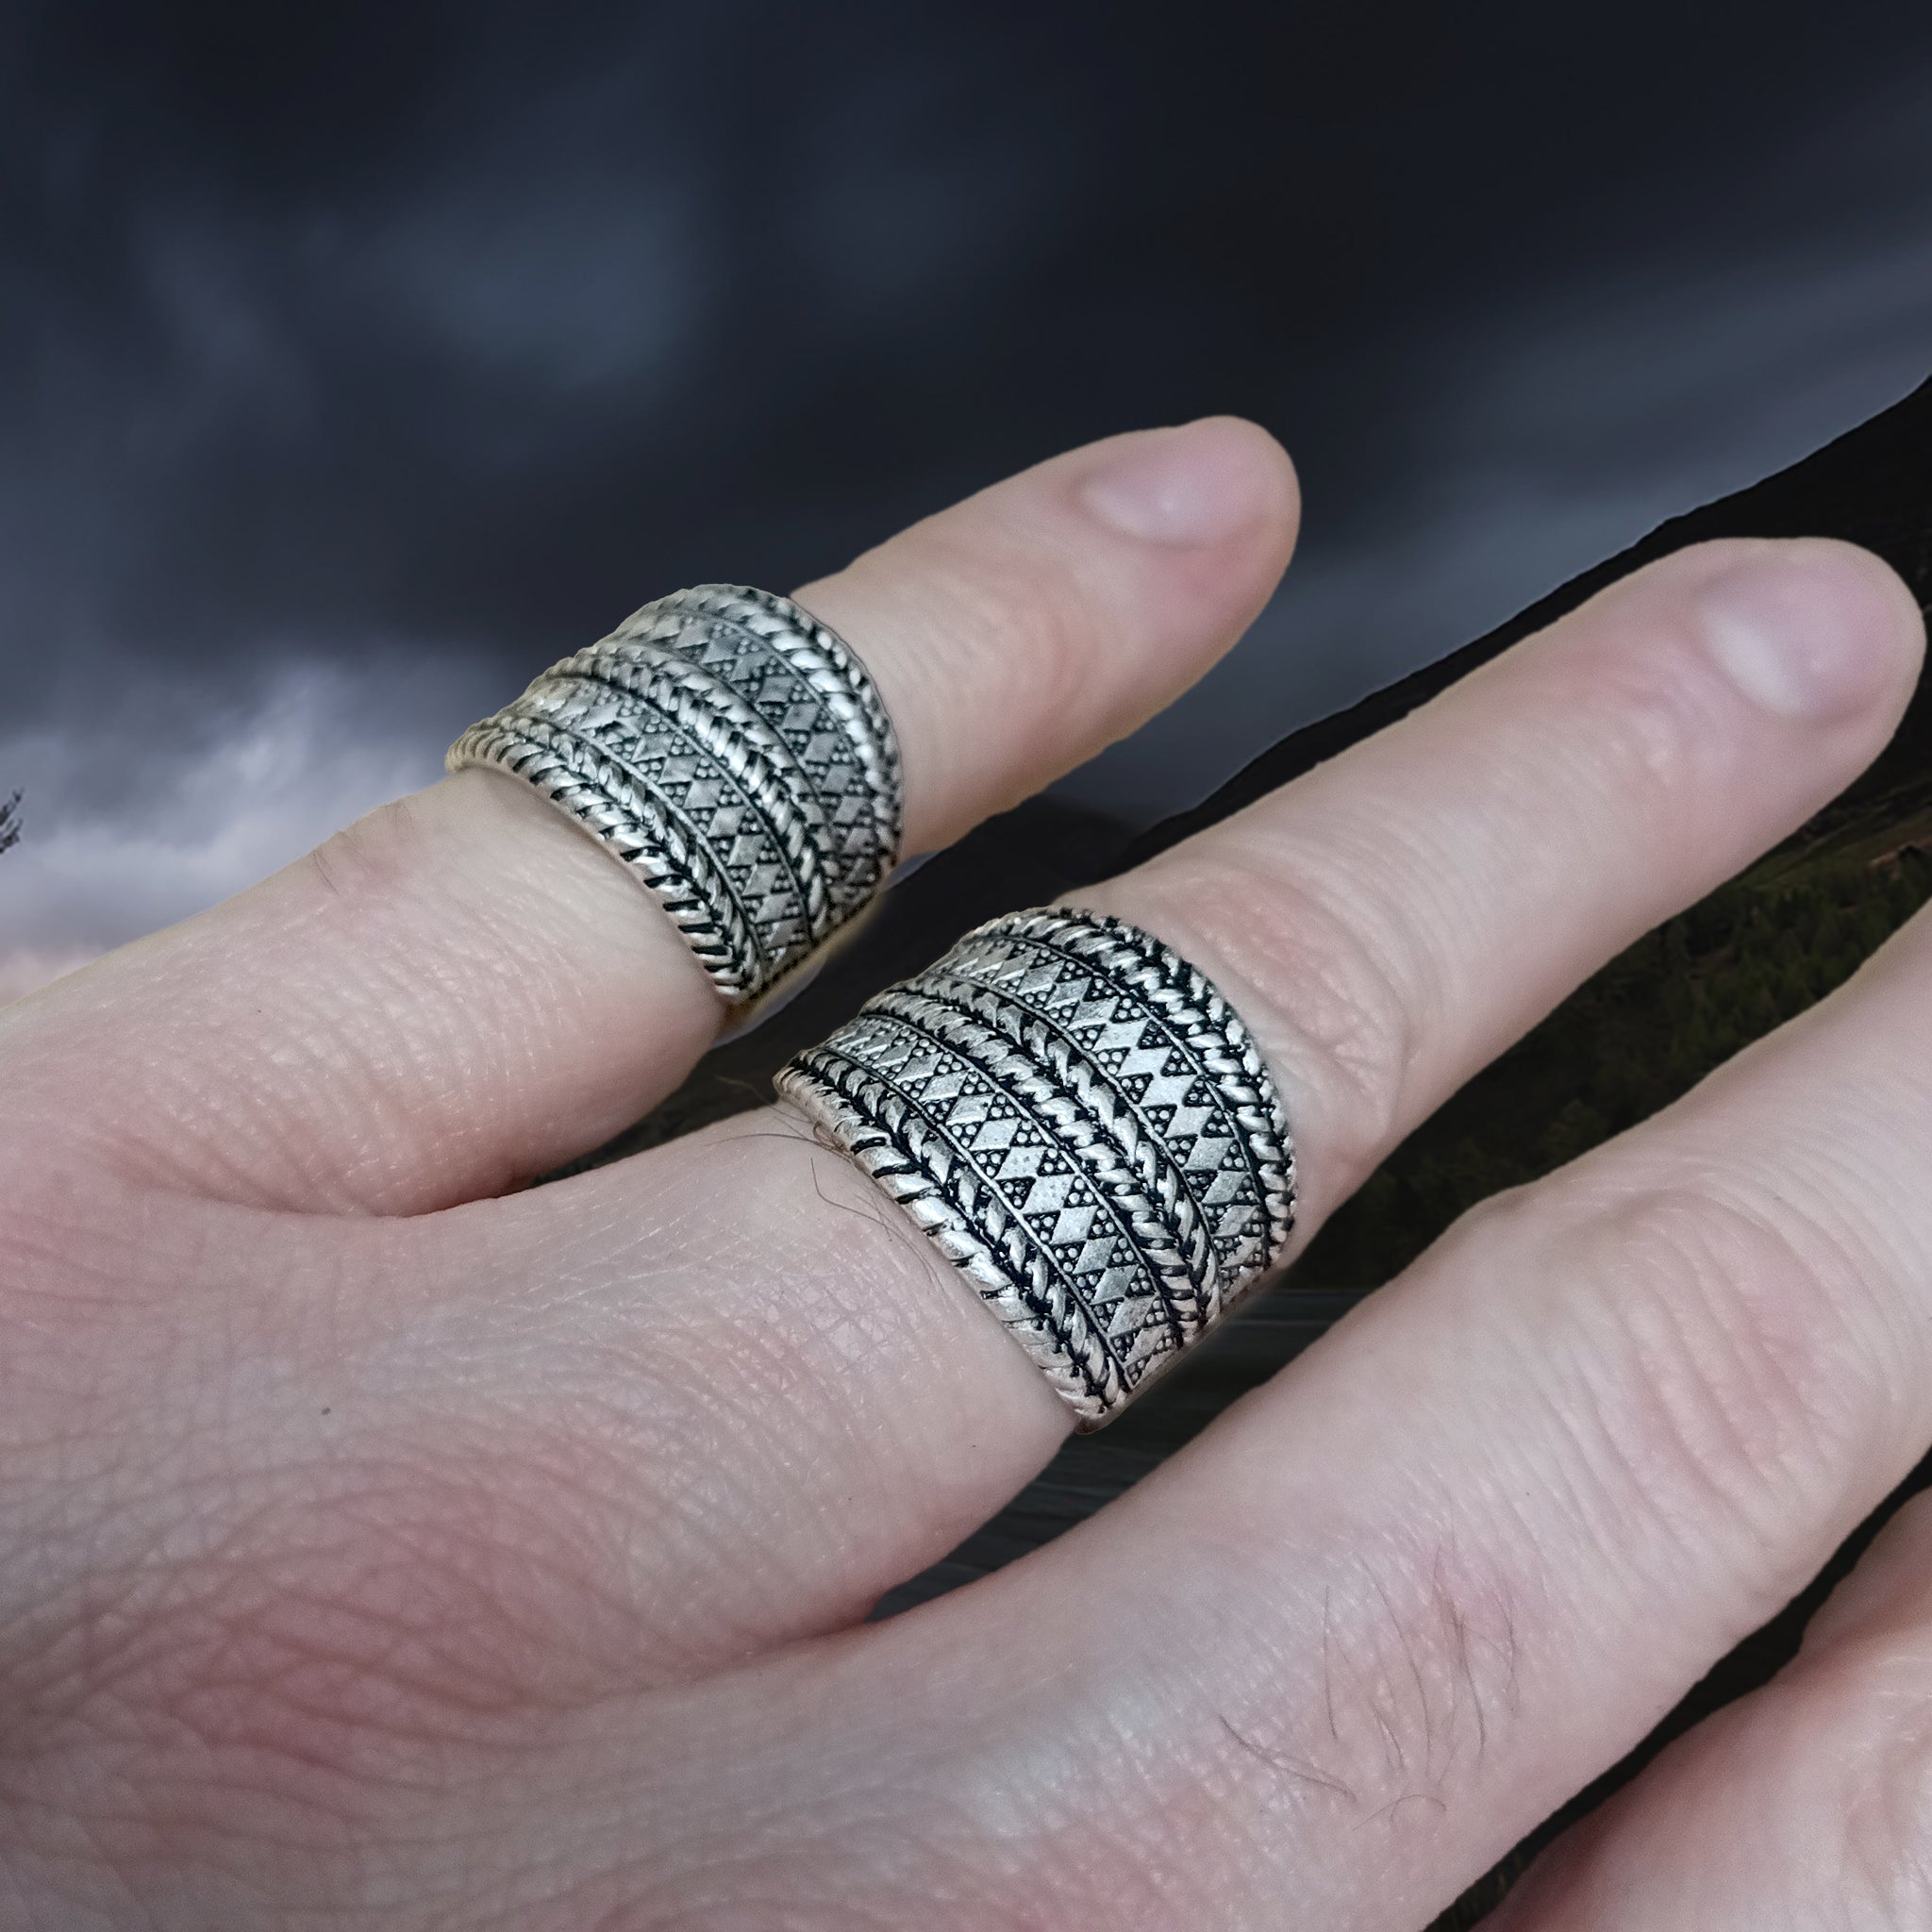 Silver Plated Replica Ring with Decorated Viking Design on Fingers